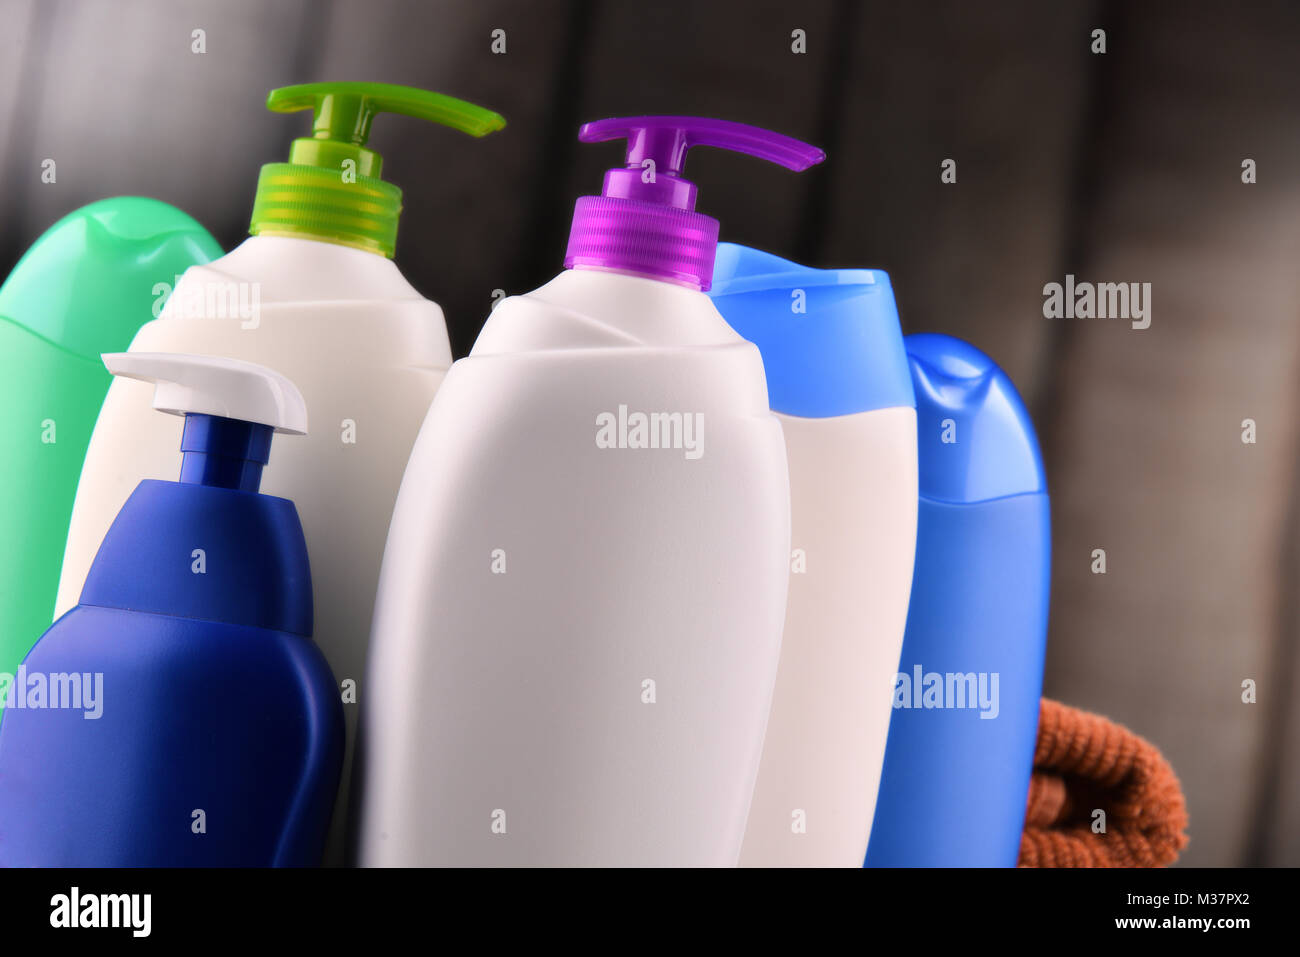 https://c8.alamy.com/comp/M37PX2/plastic-bottles-of-body-care-and-beauty-products-M37PX2.jpg